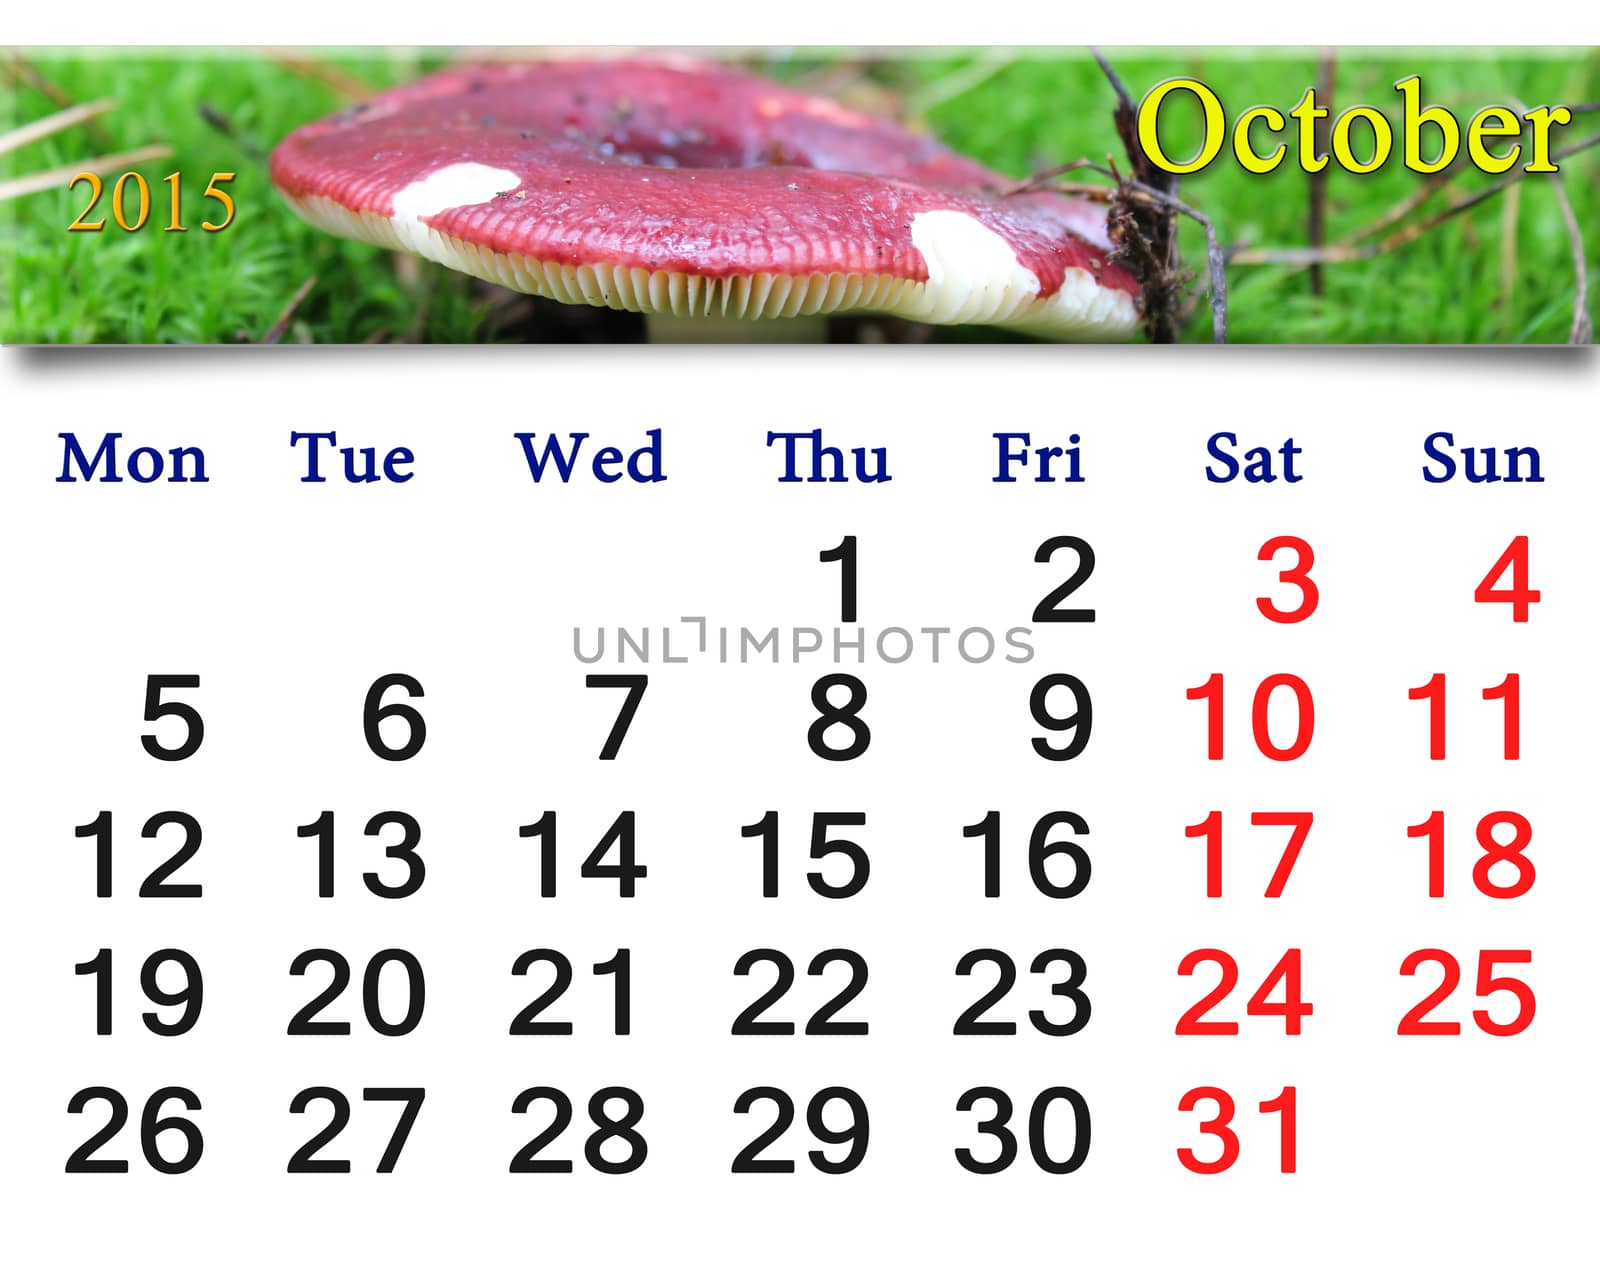 calendar for October of 2015 with mushroom russula by alexmak